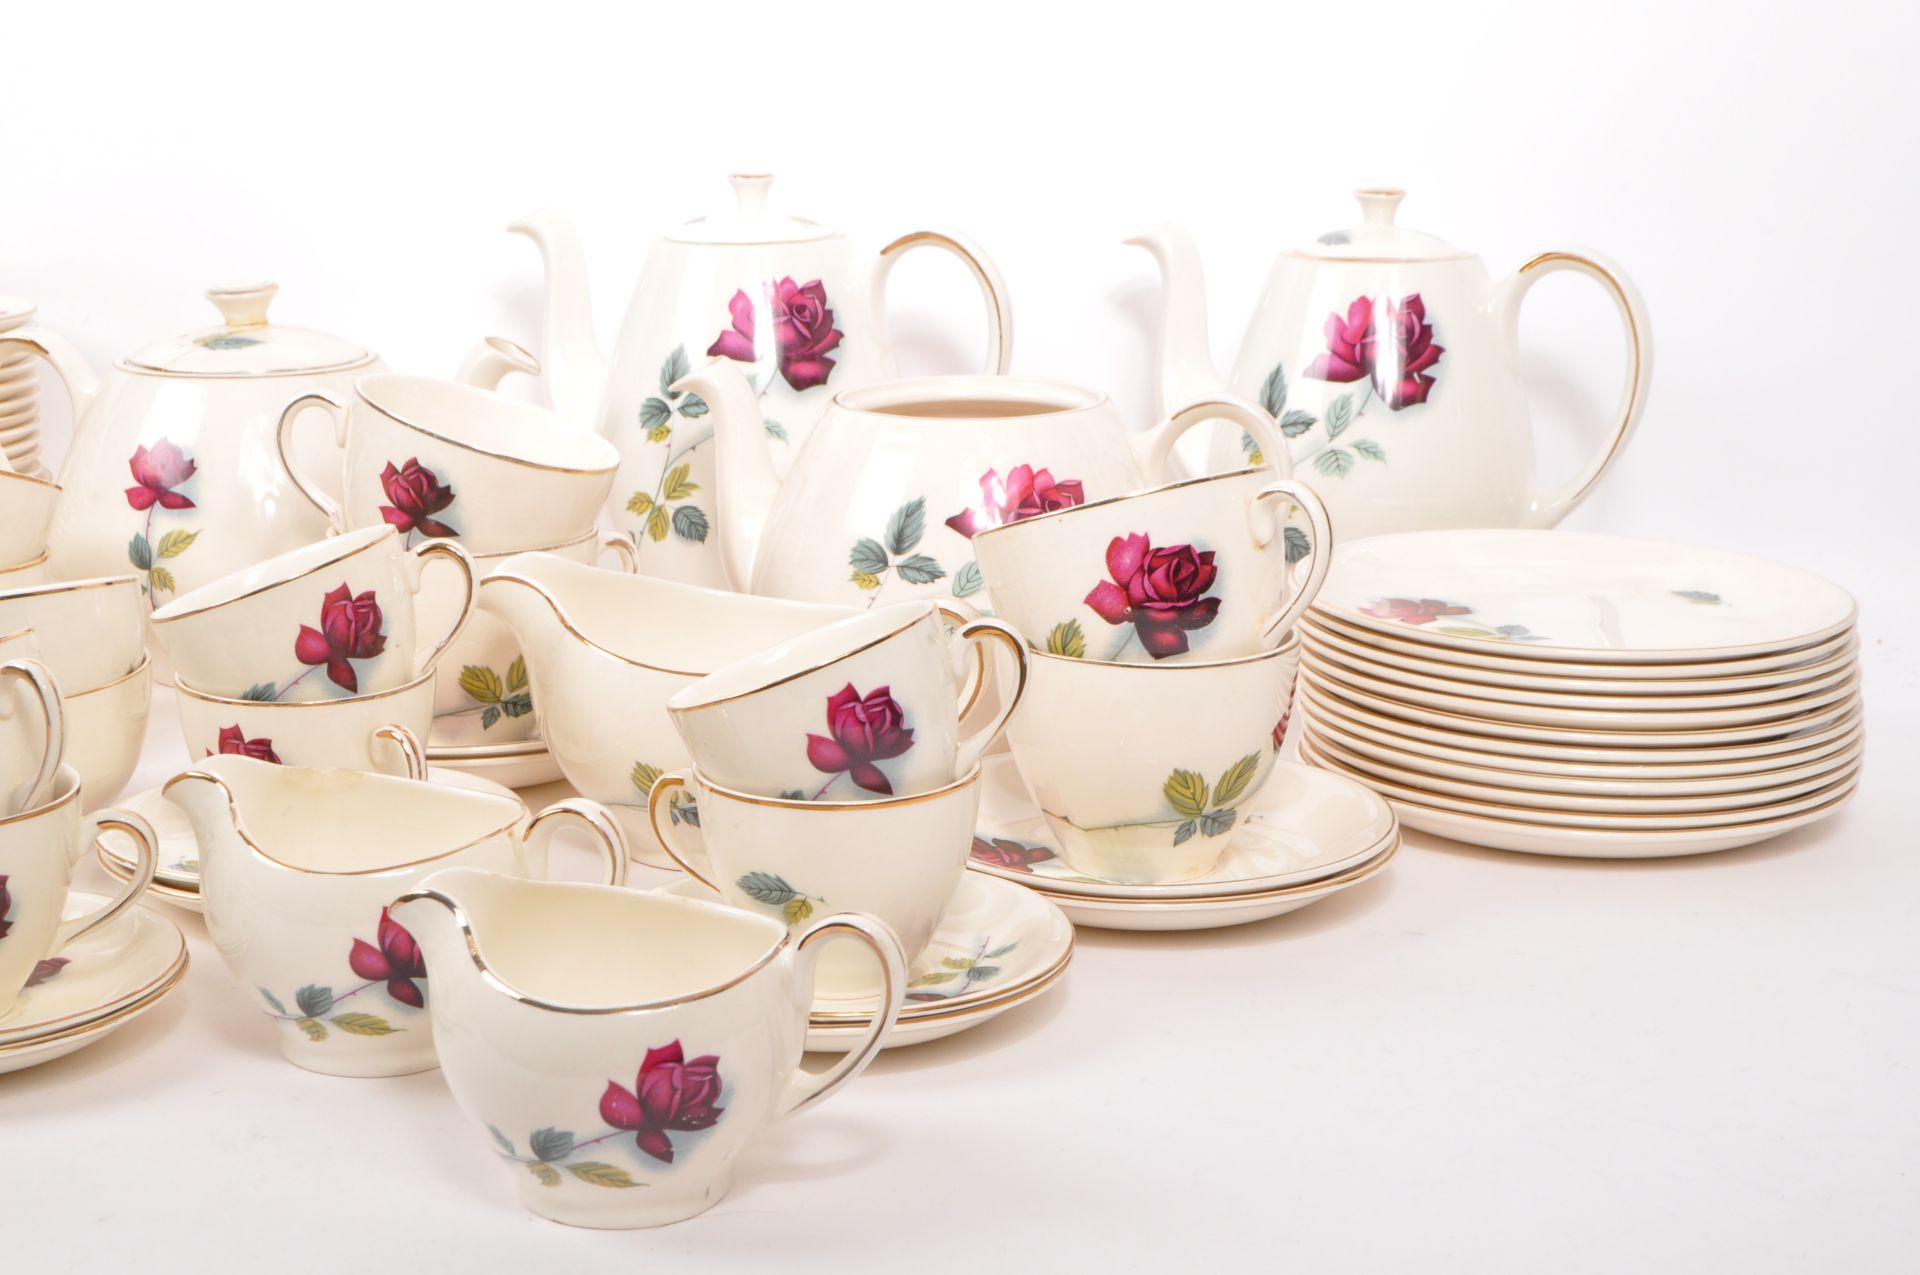 MID CENTURY 1950S REALM ROSE TEA DINNER SERVICE ALFRED MEAKIN - Image 2 of 7